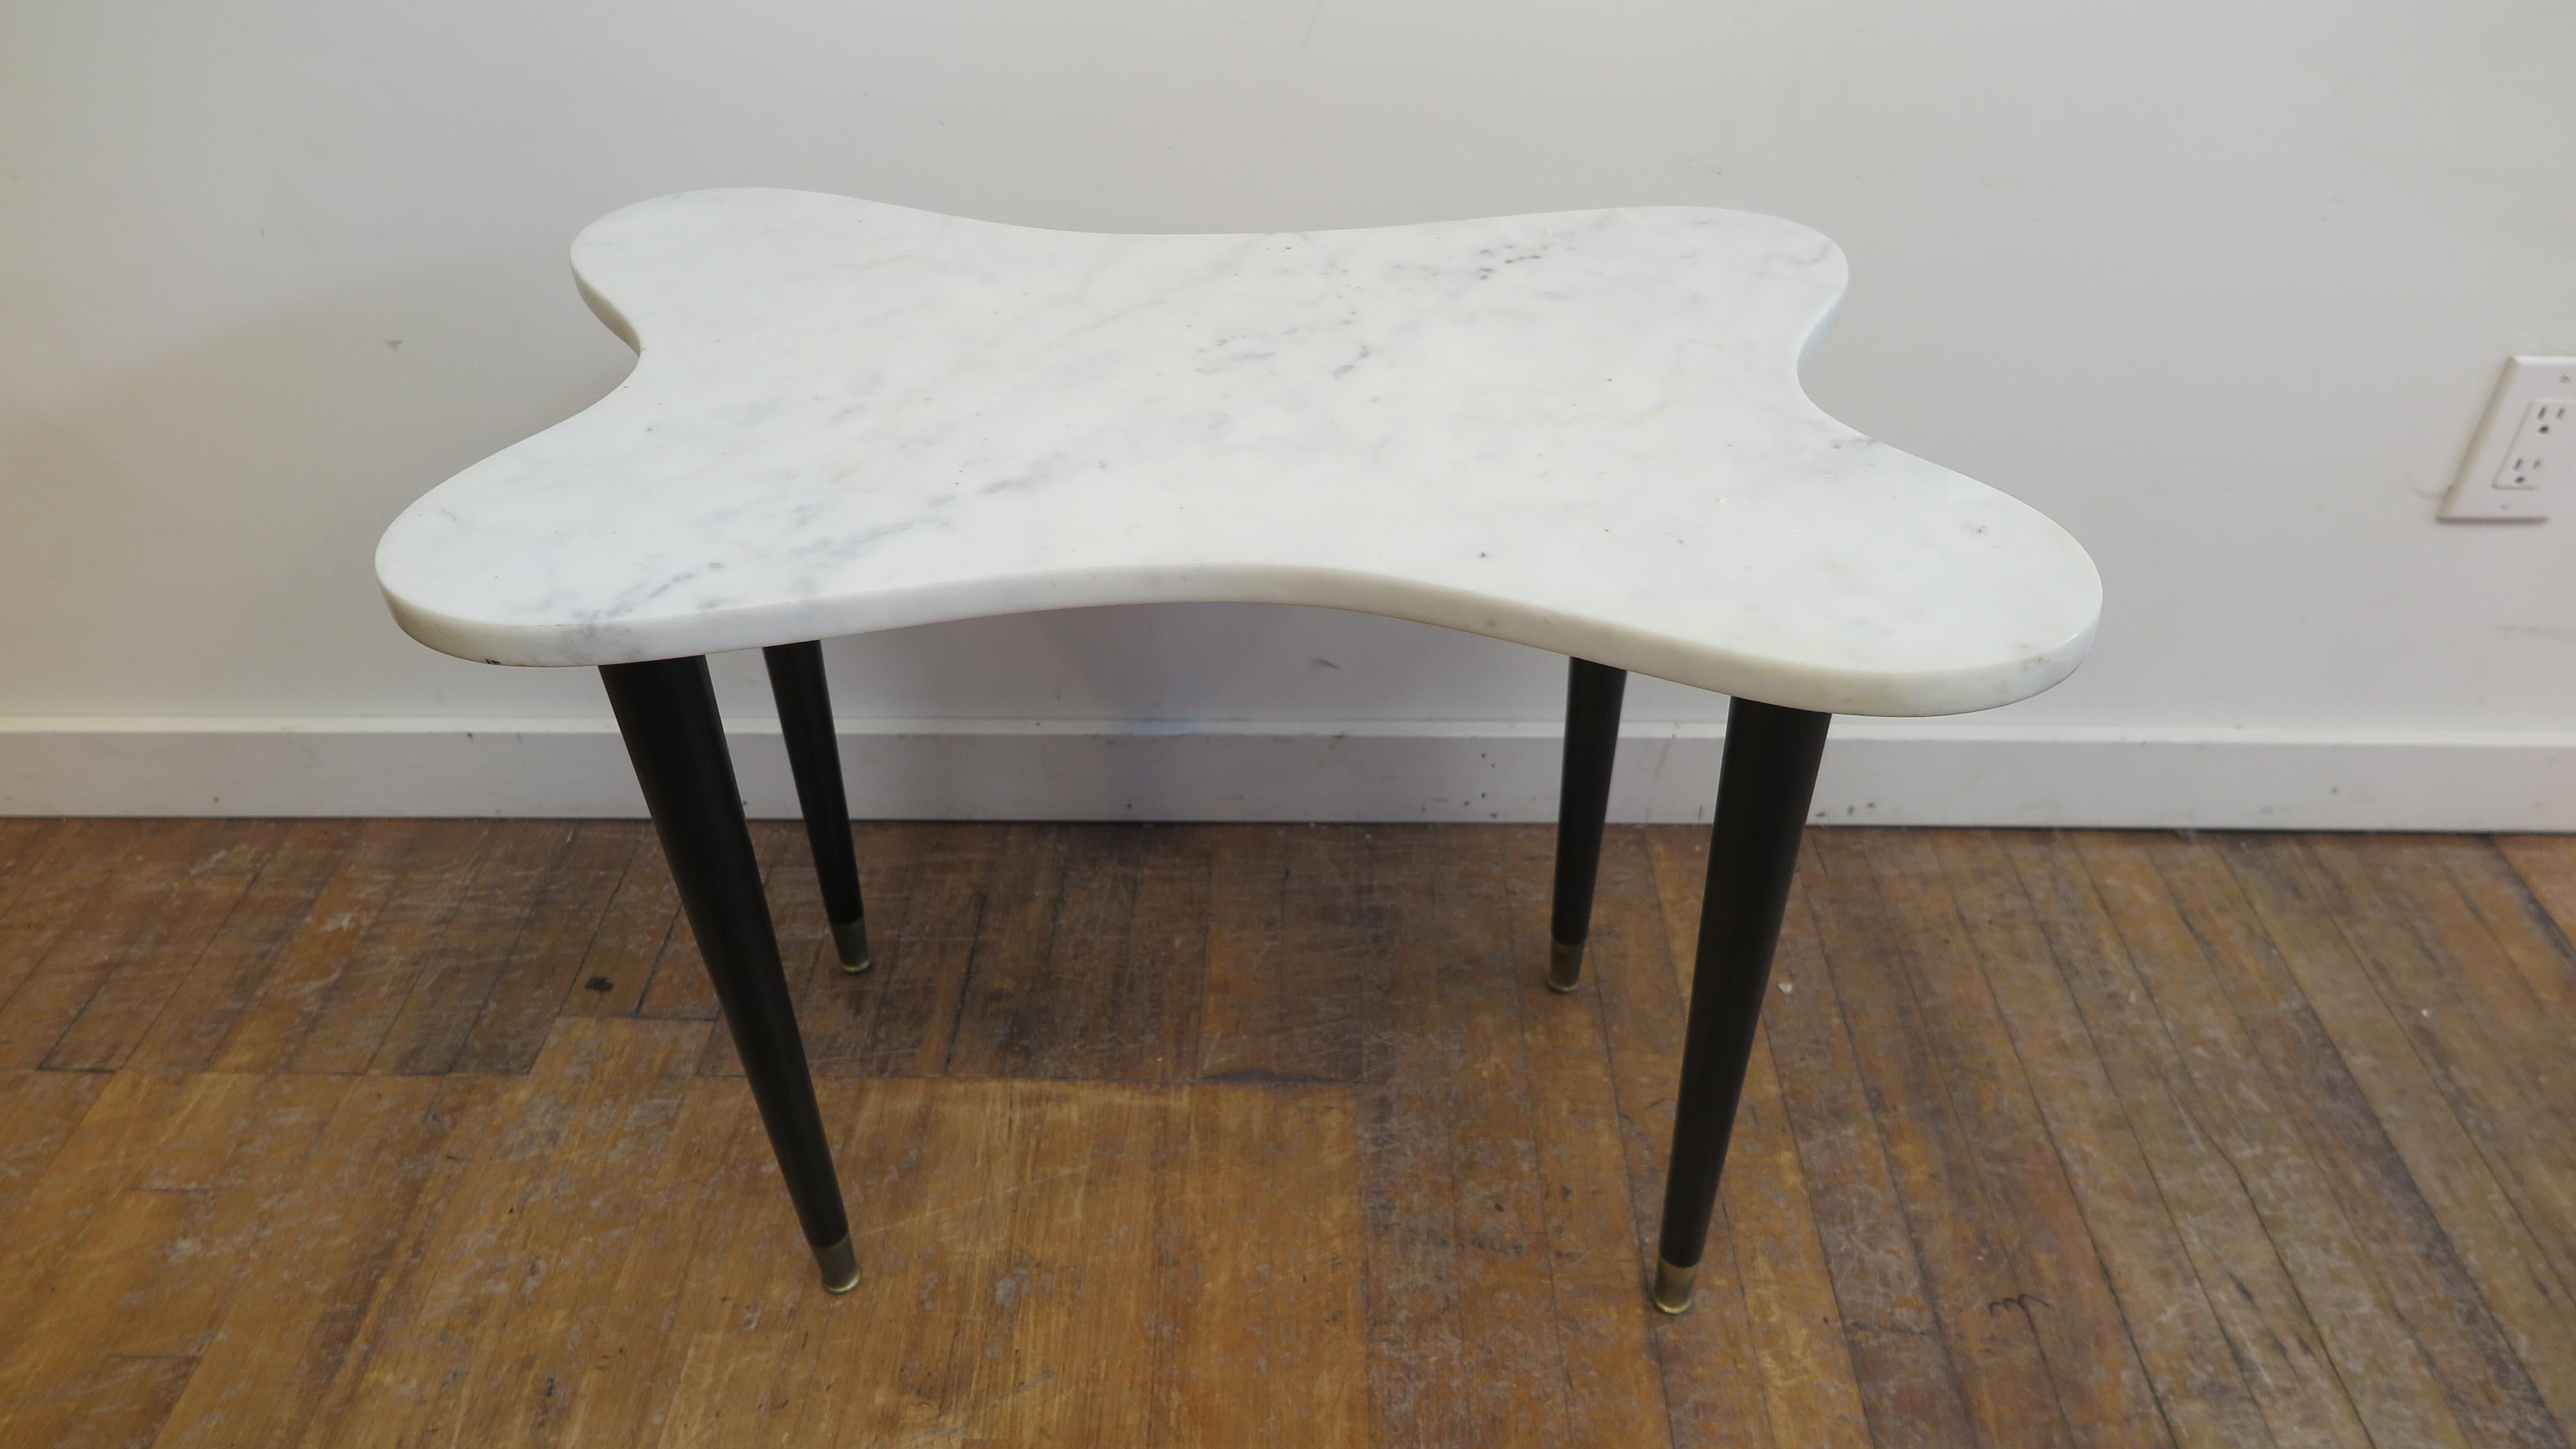 Mid-century Modern Italian marble top table biomorphic shape on 4 tapered black lacquered legs with brass sabot feet. Italian mid century biomorphic carrara marble side table and or cocktail table. The table size is very flexible as side, end, or